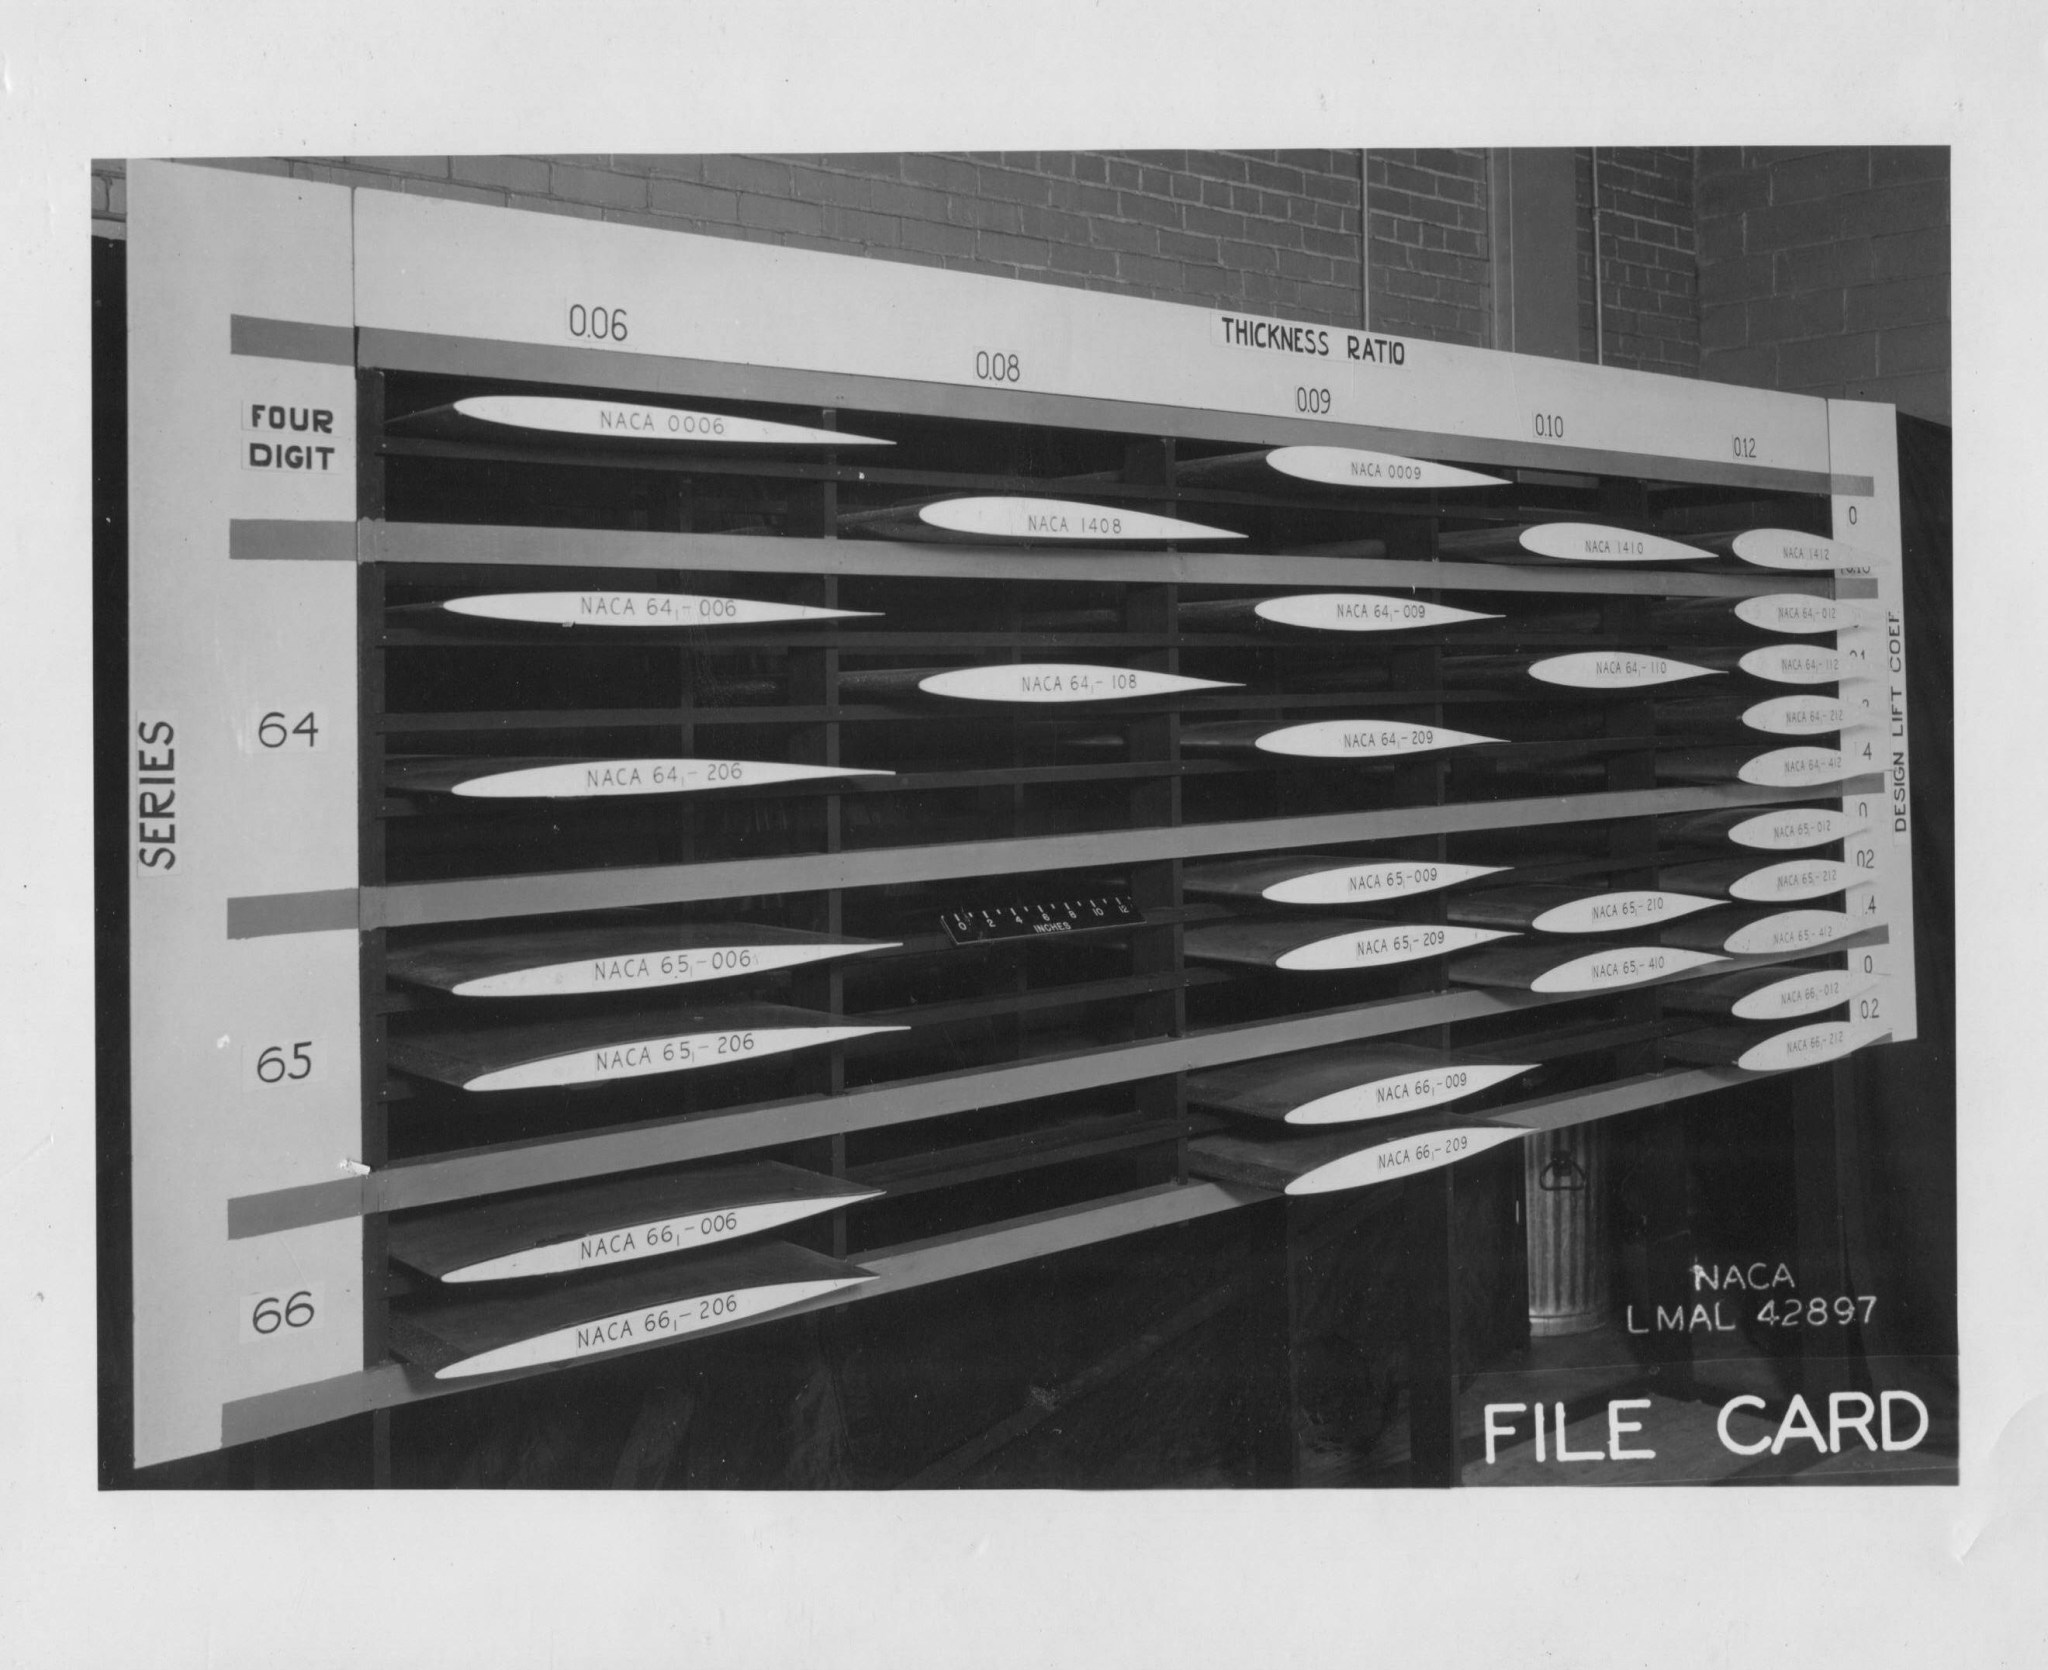 Model rack with various airfoil models used for testing in Building 583, circa 1945.